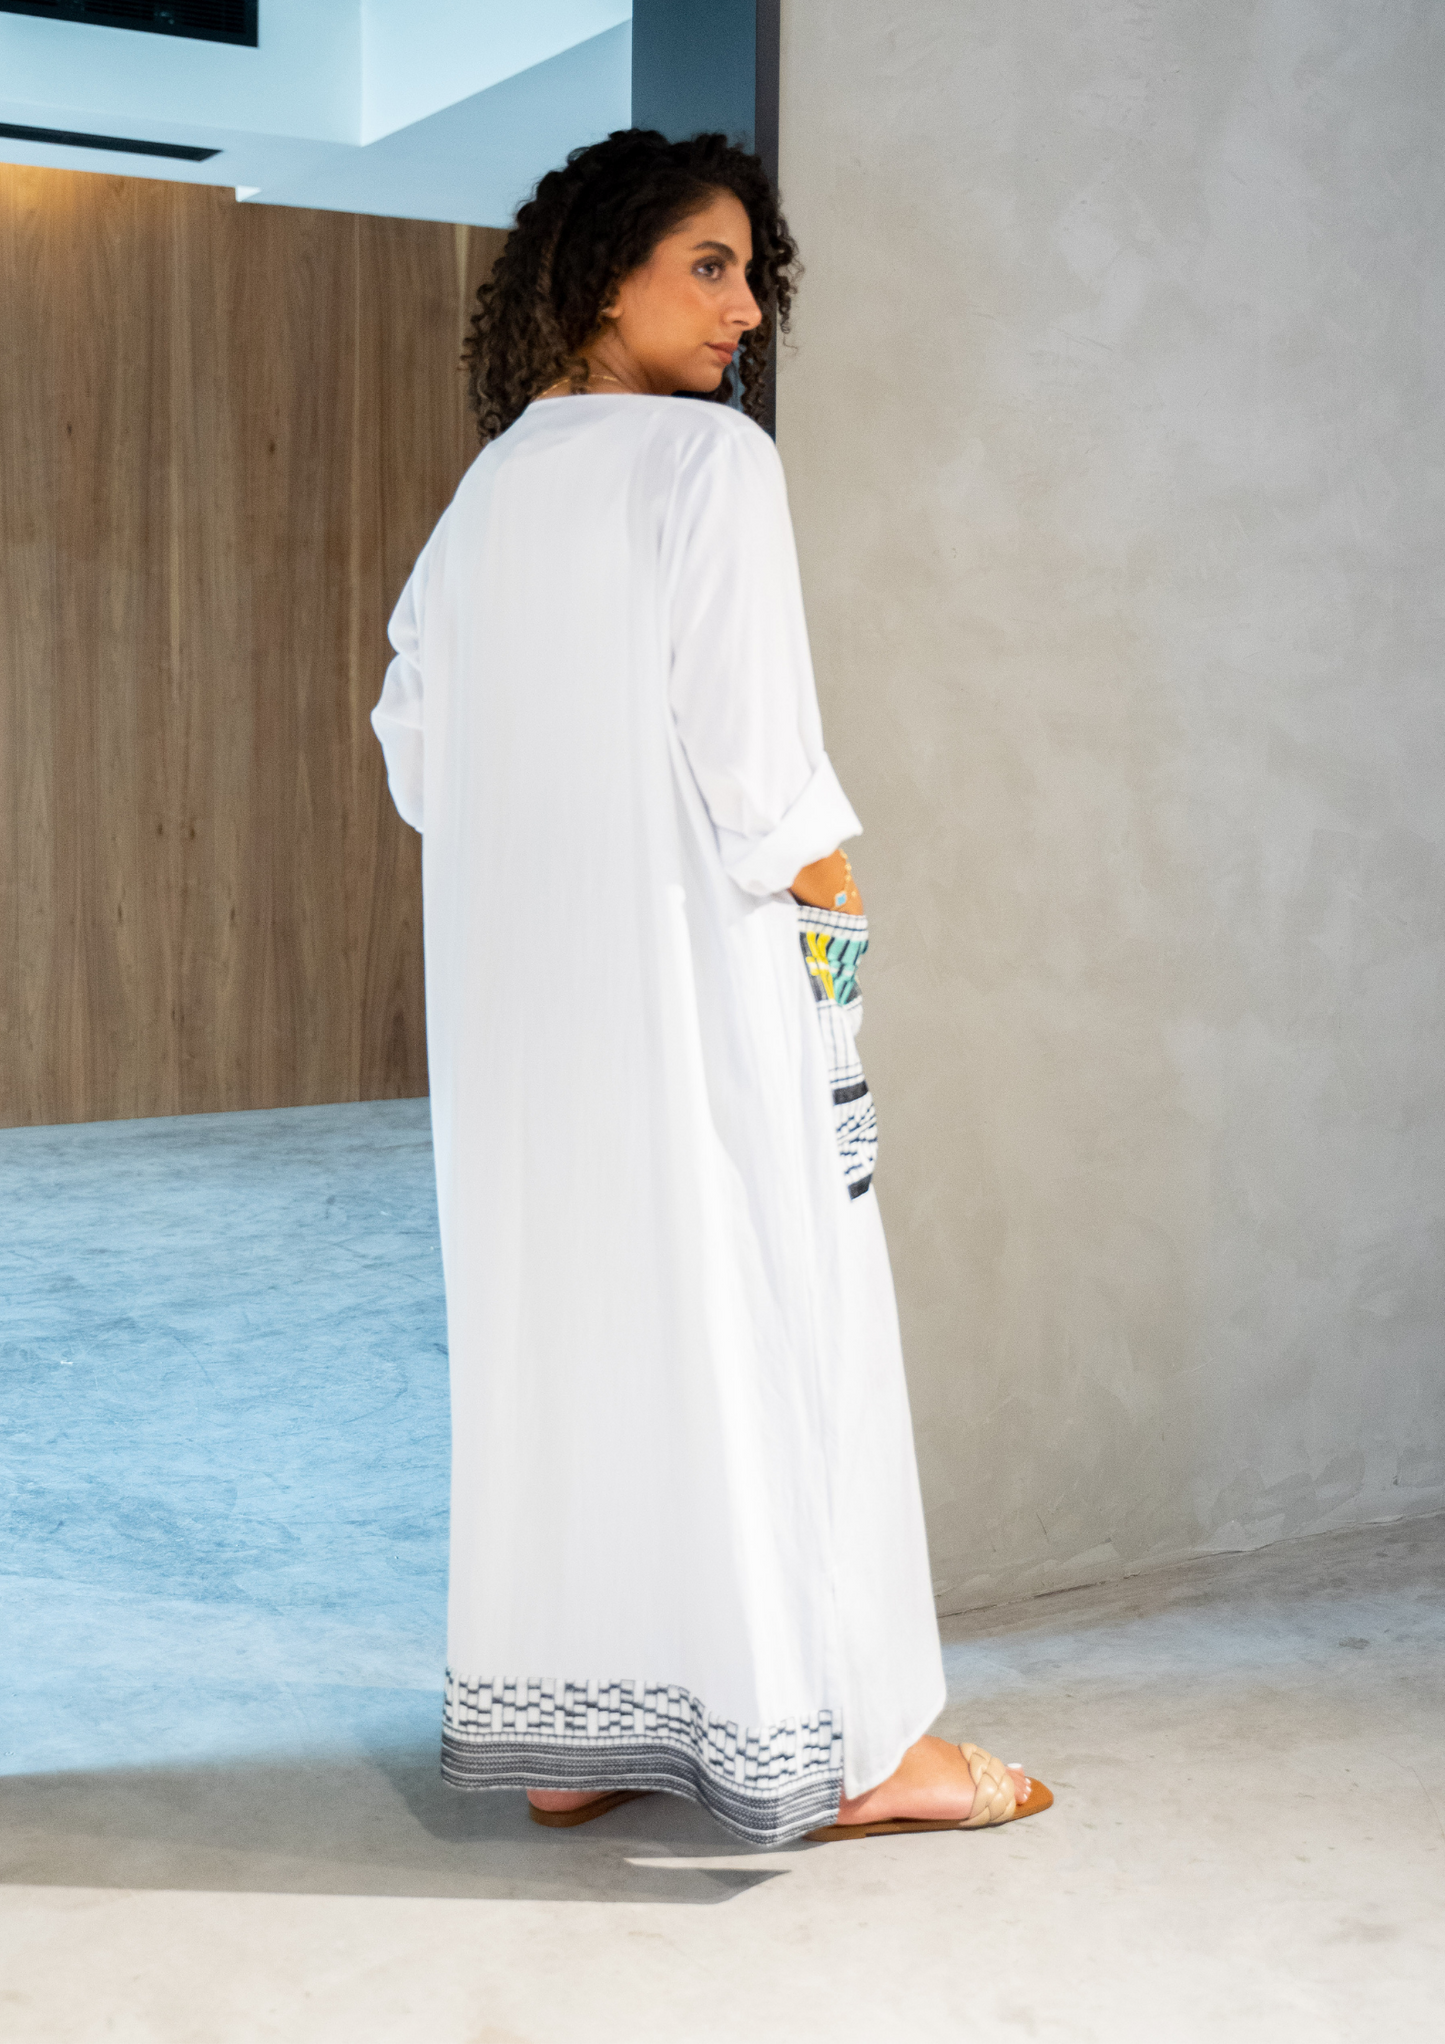 The Bisha Abaya - Embroidered pockets - The Untitled Project